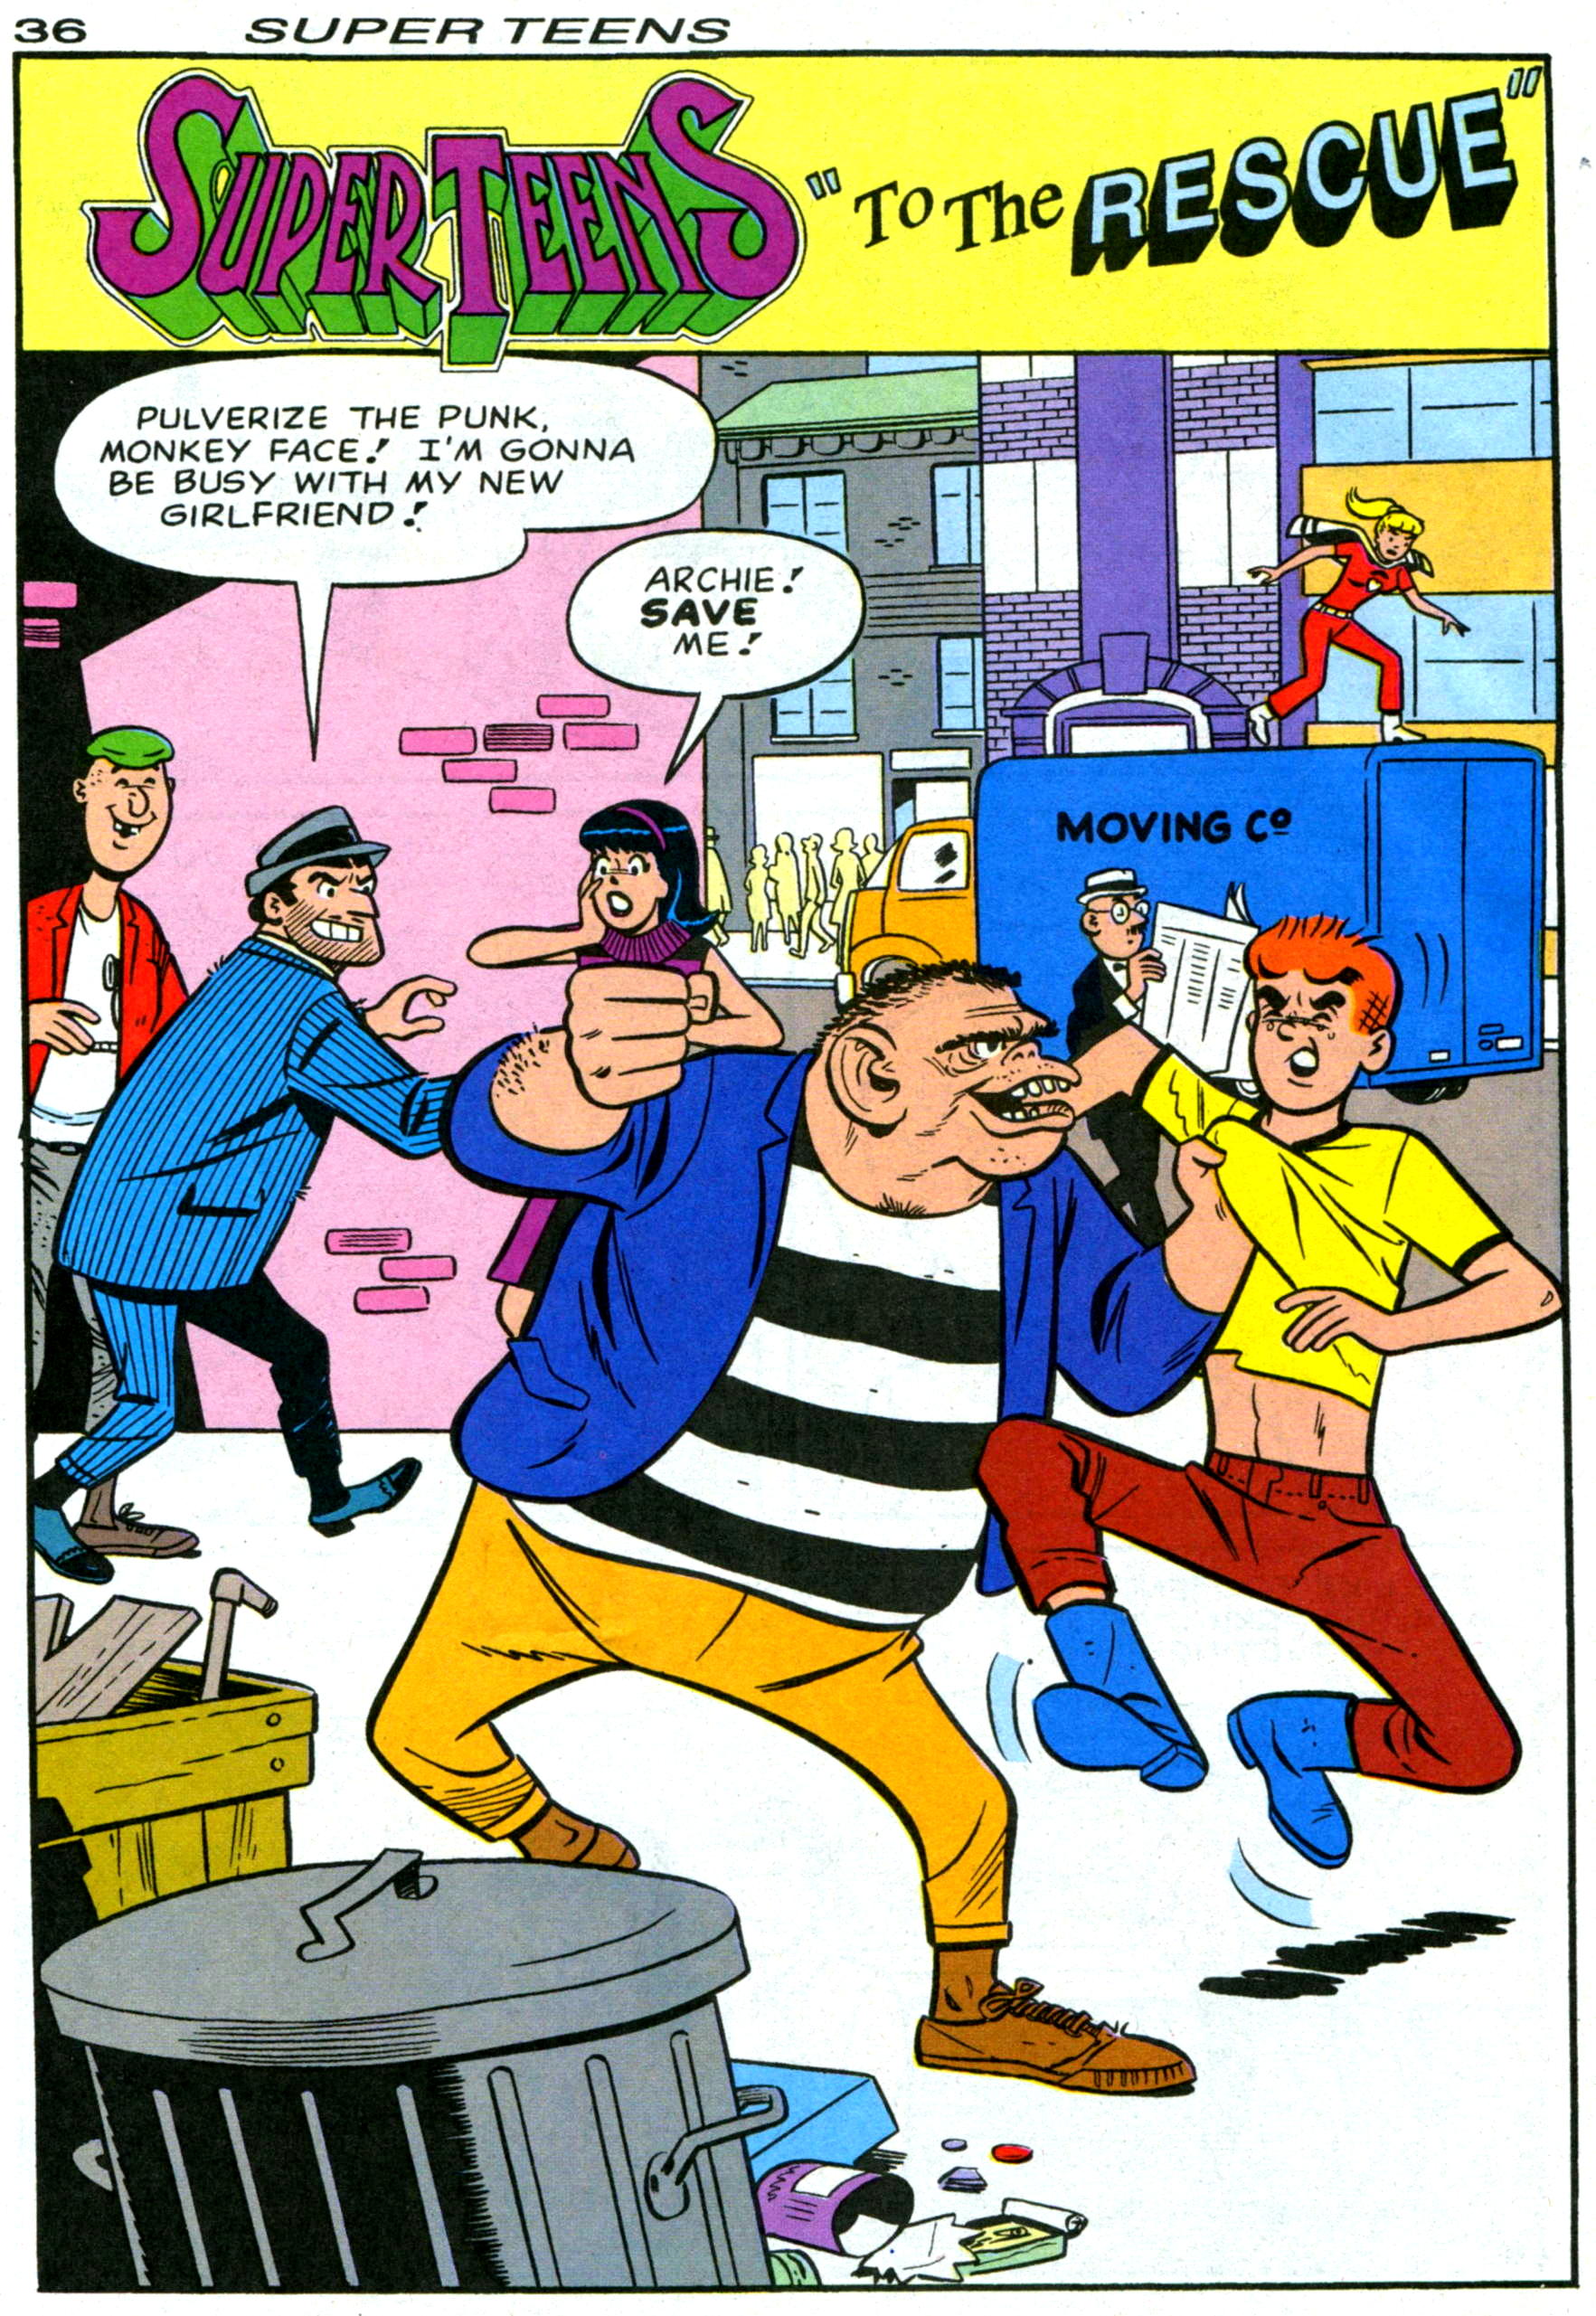 Read online Archie's Super Teens comic -  Issue #1 - 38